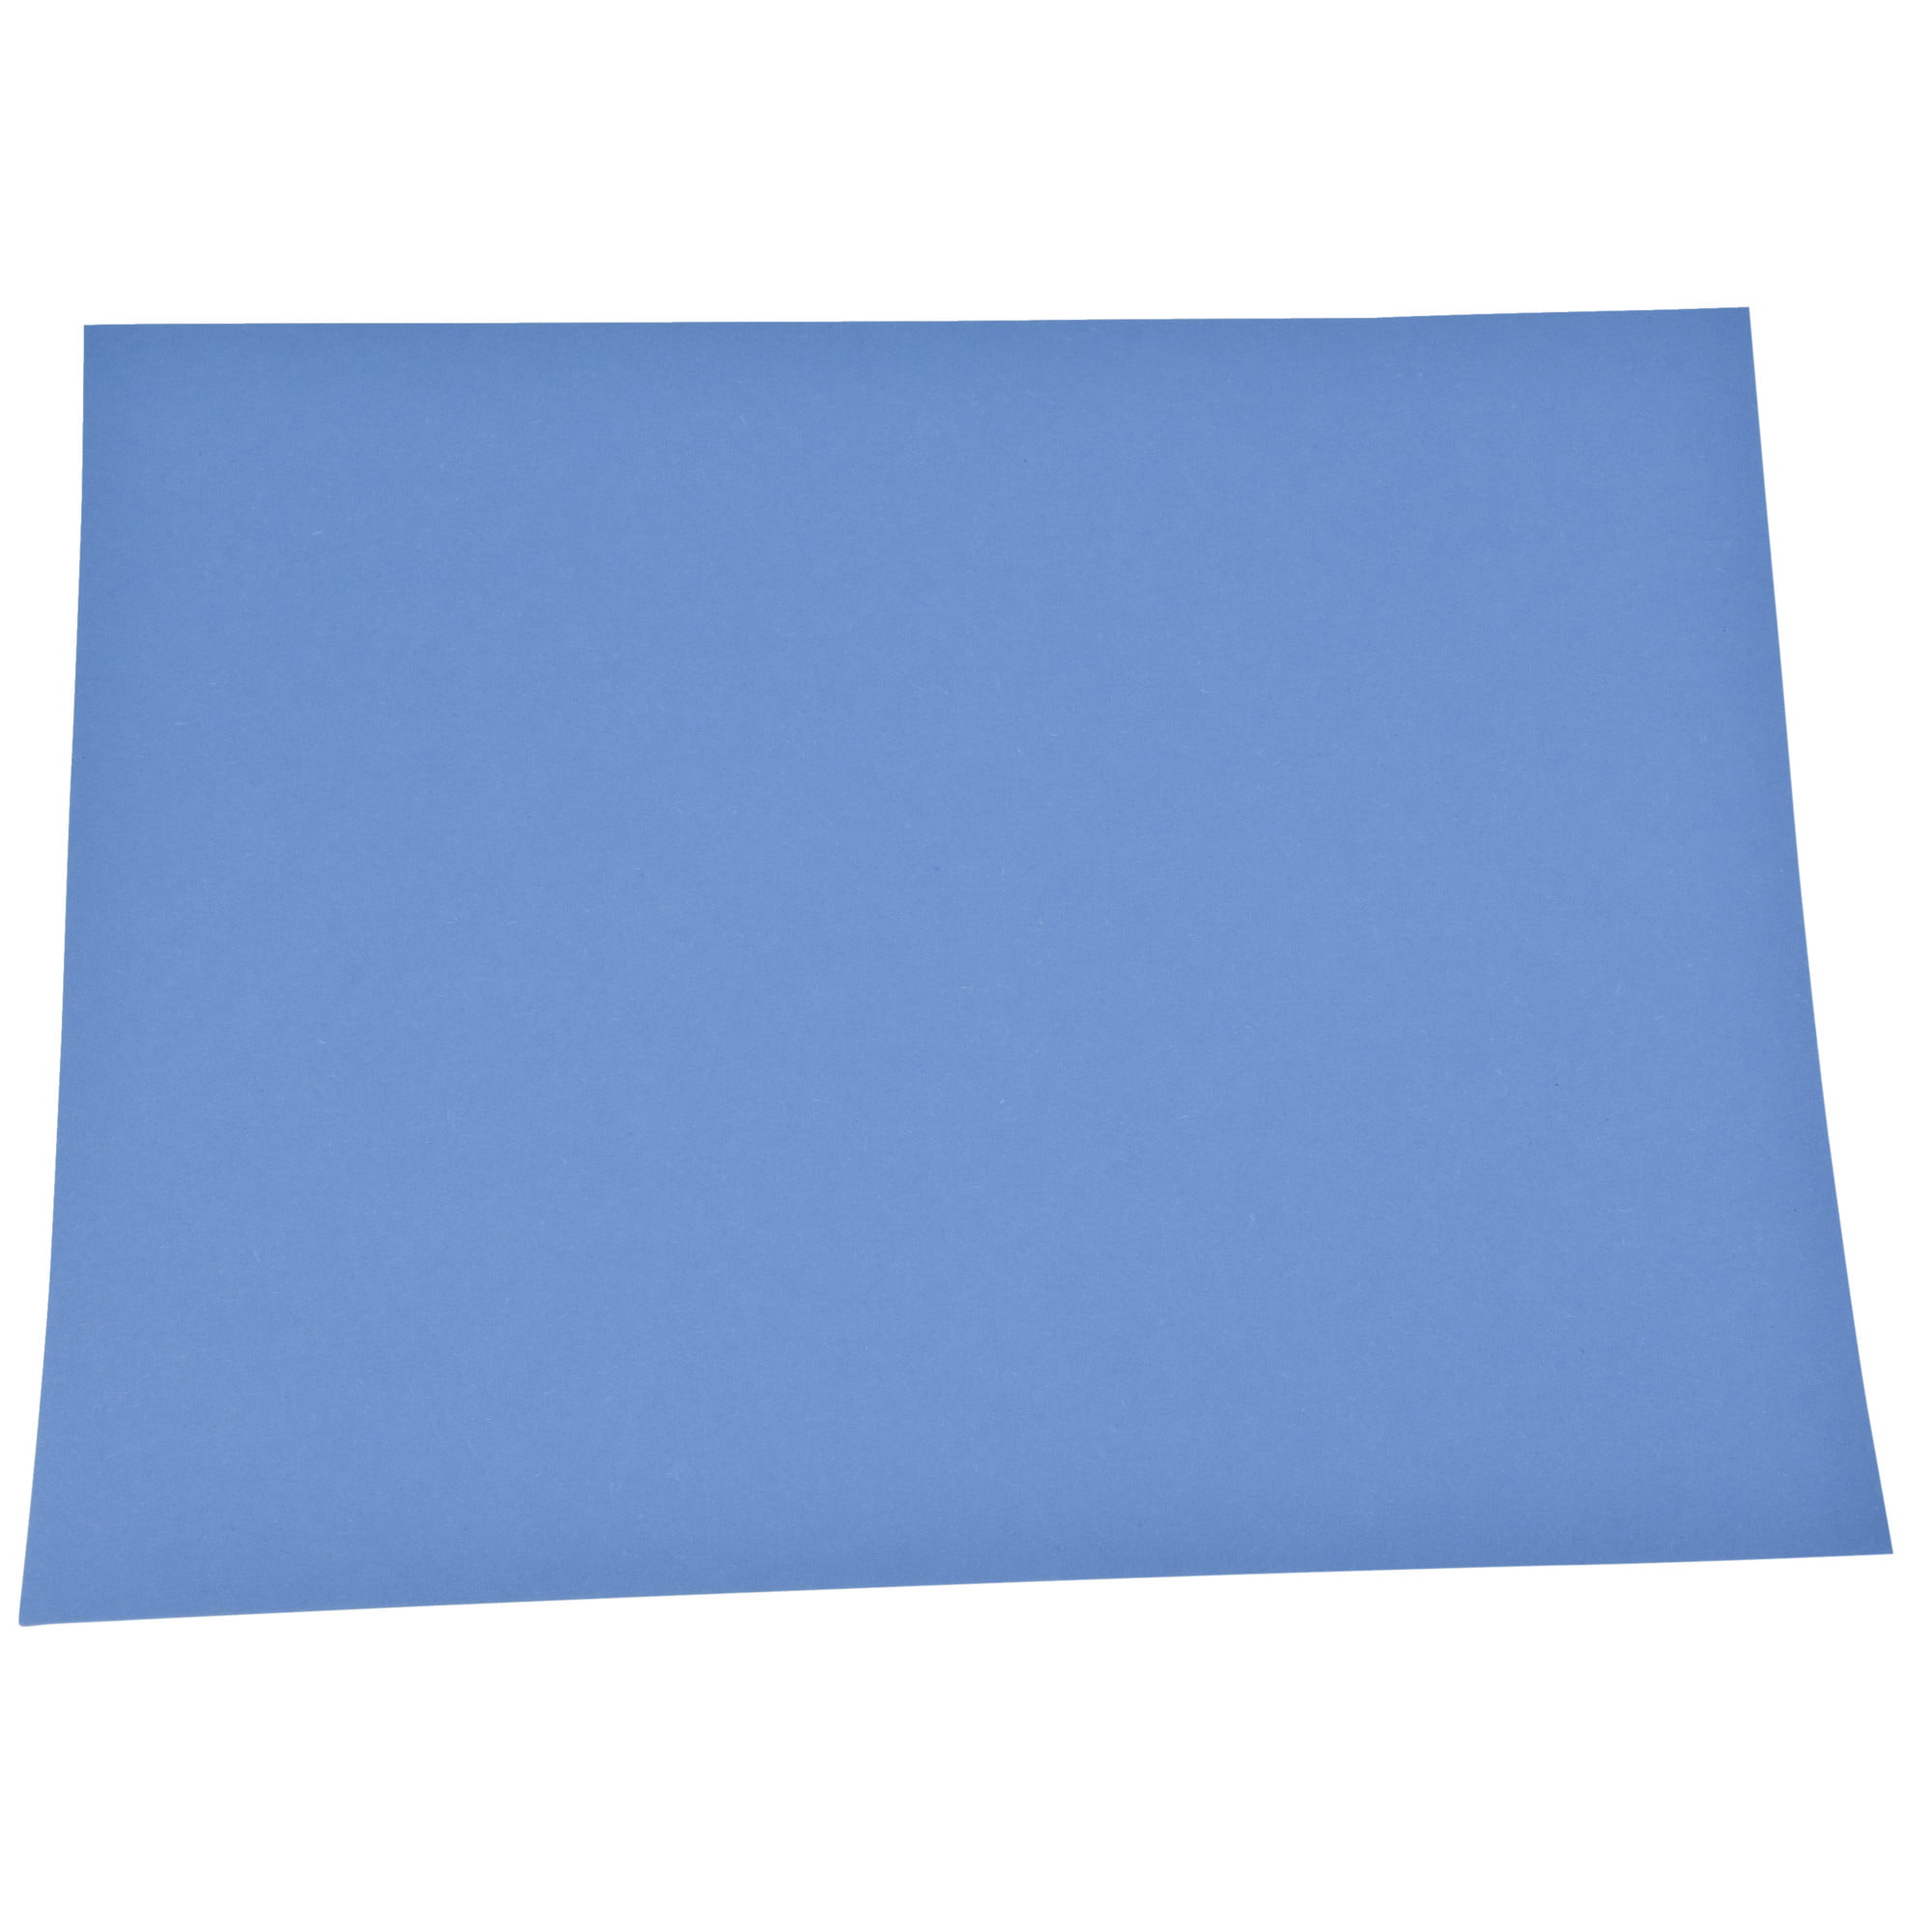 Sax Colored Art Paper, 12 x 18 Inches, Cyan Blue, 50 Sheets 